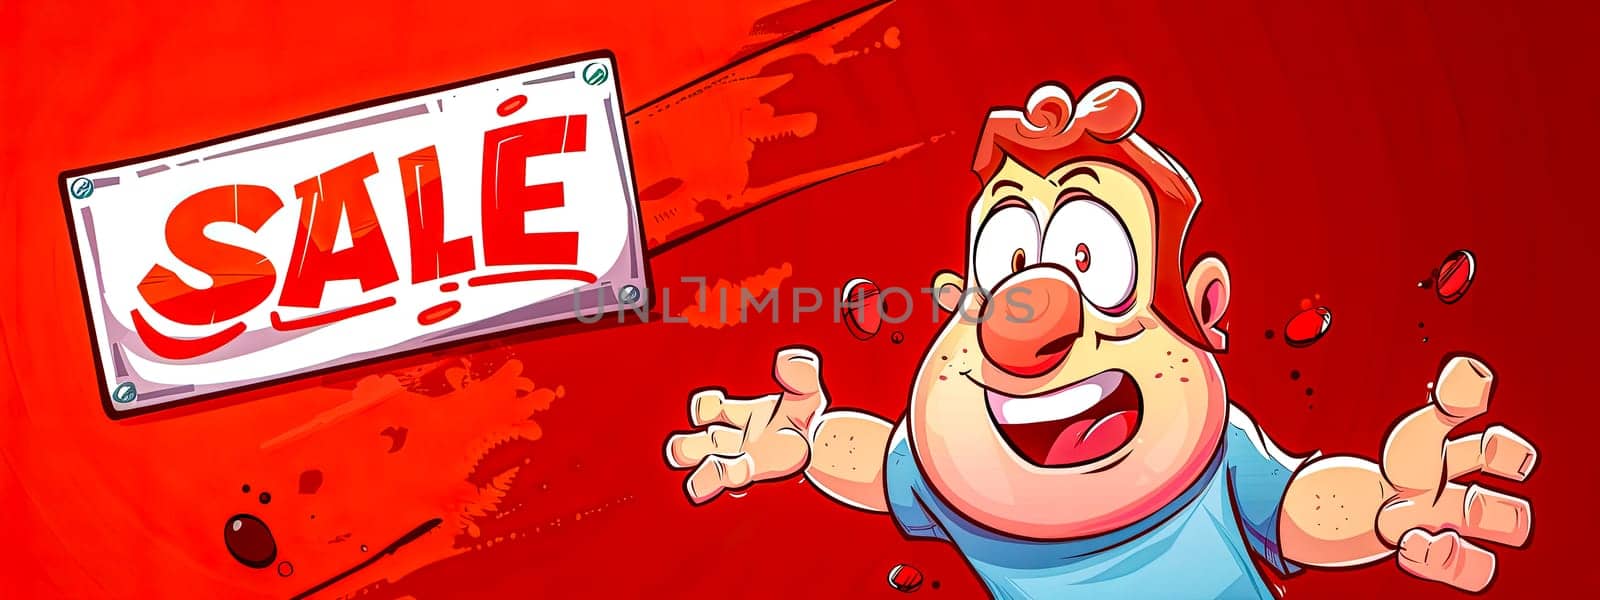 Excited cartoon shopper with sale sign by Edophoto